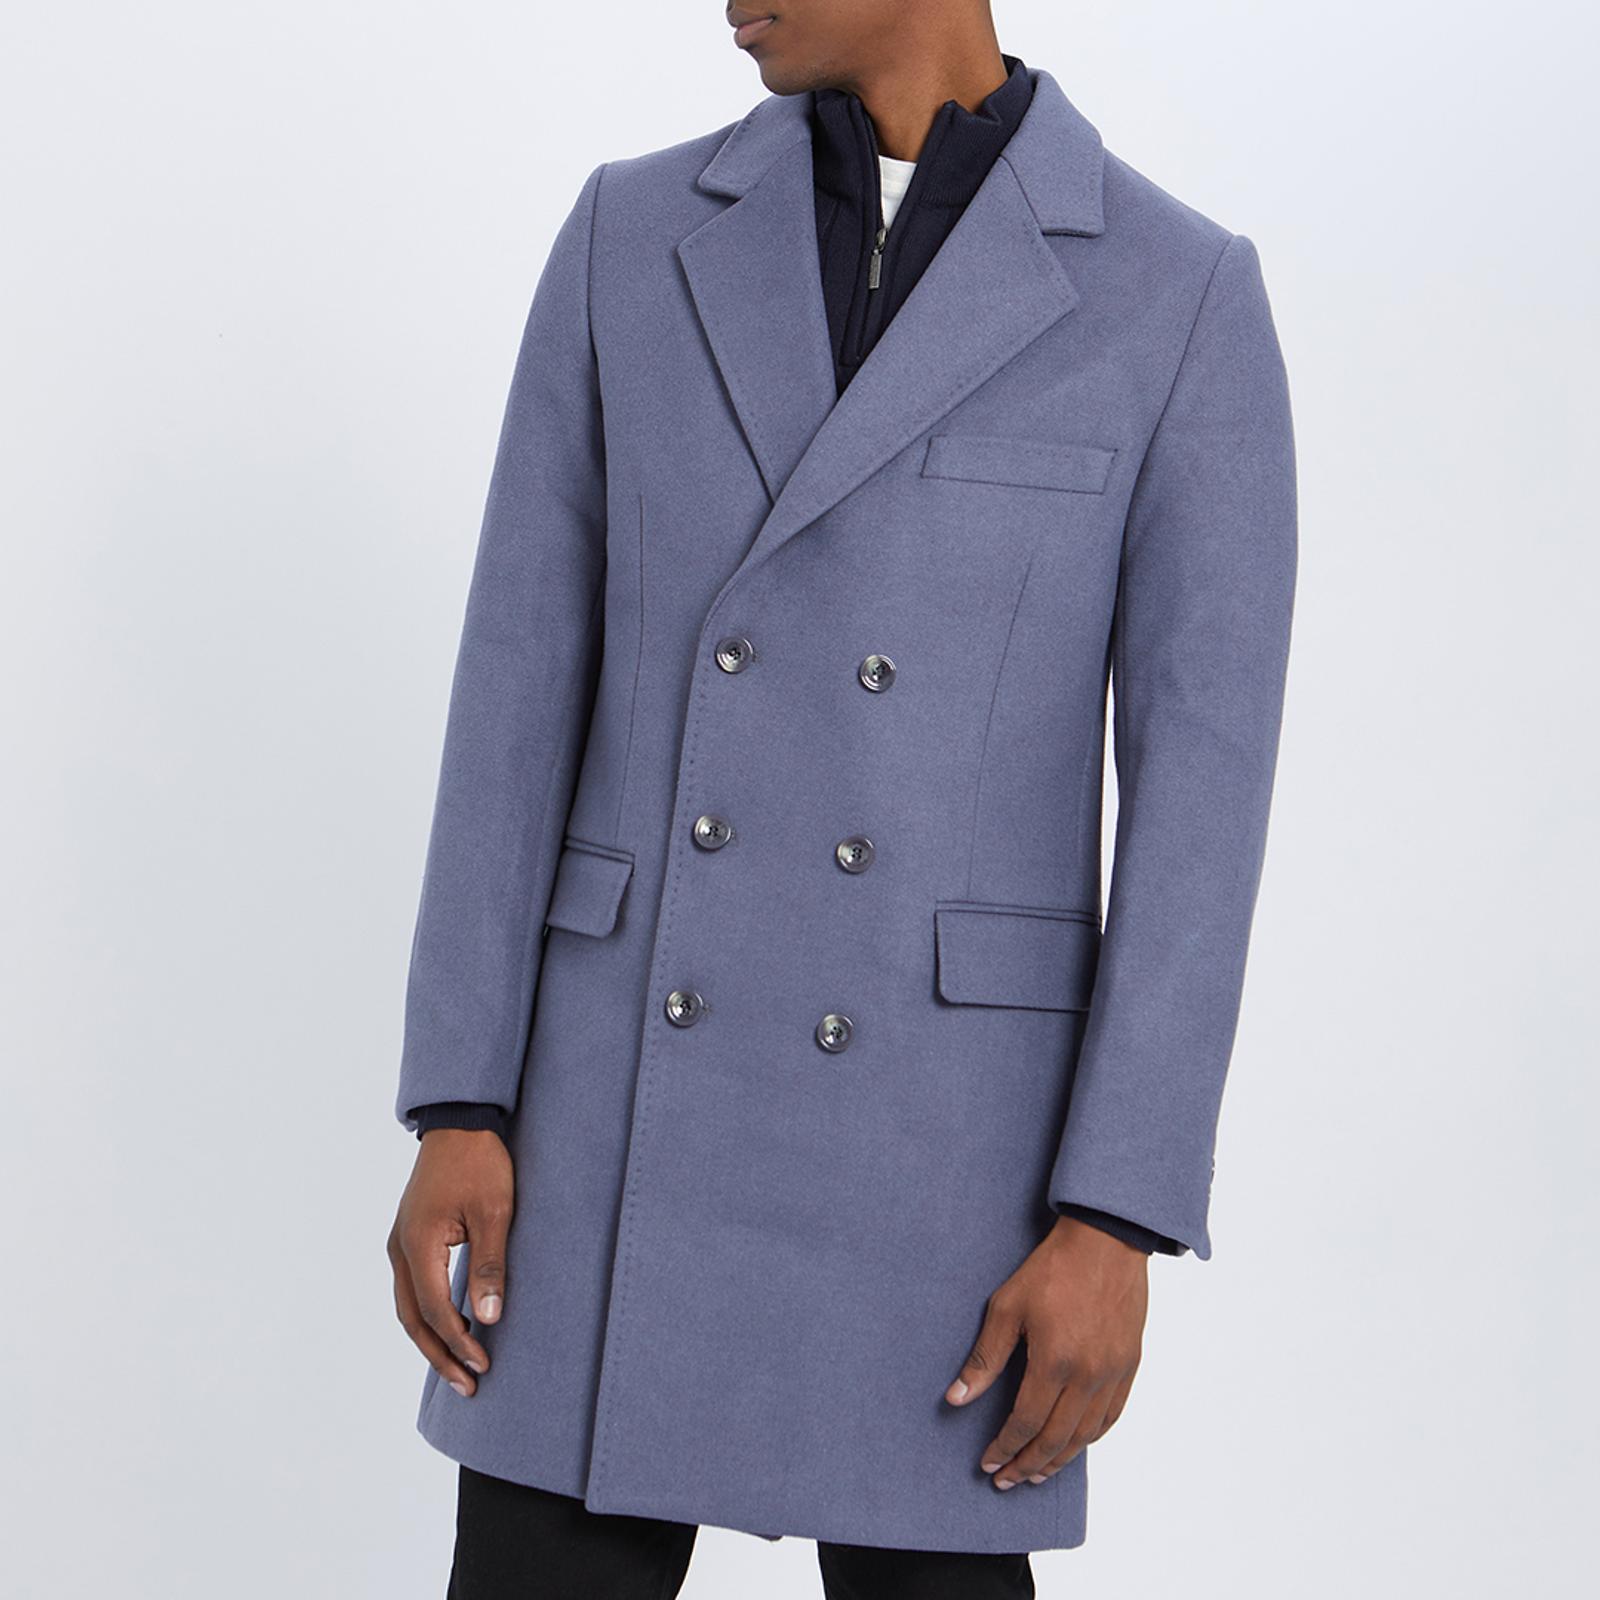 Blue Double Breasted Wool Blend Coat - BrandAlley